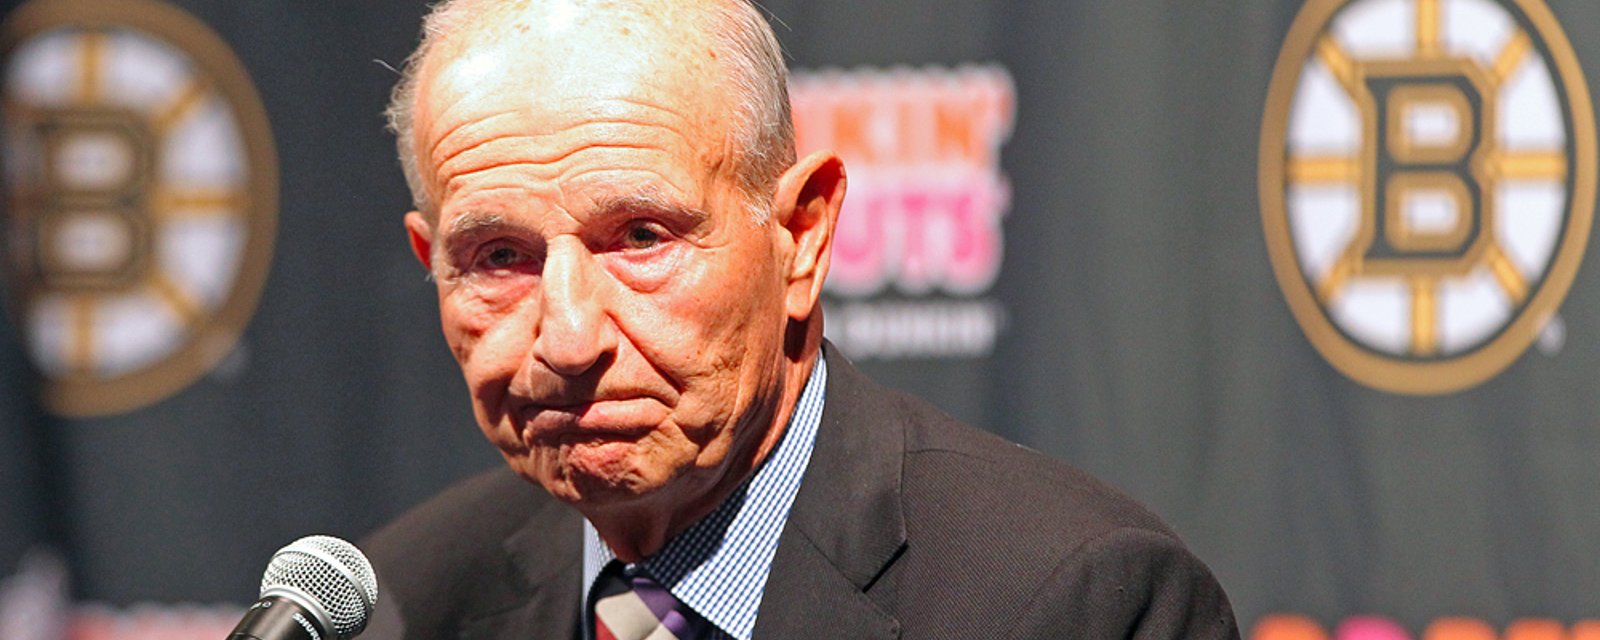 Bruins owner Jeremy Jacobs is reportedly “livid” with Gary Bettman